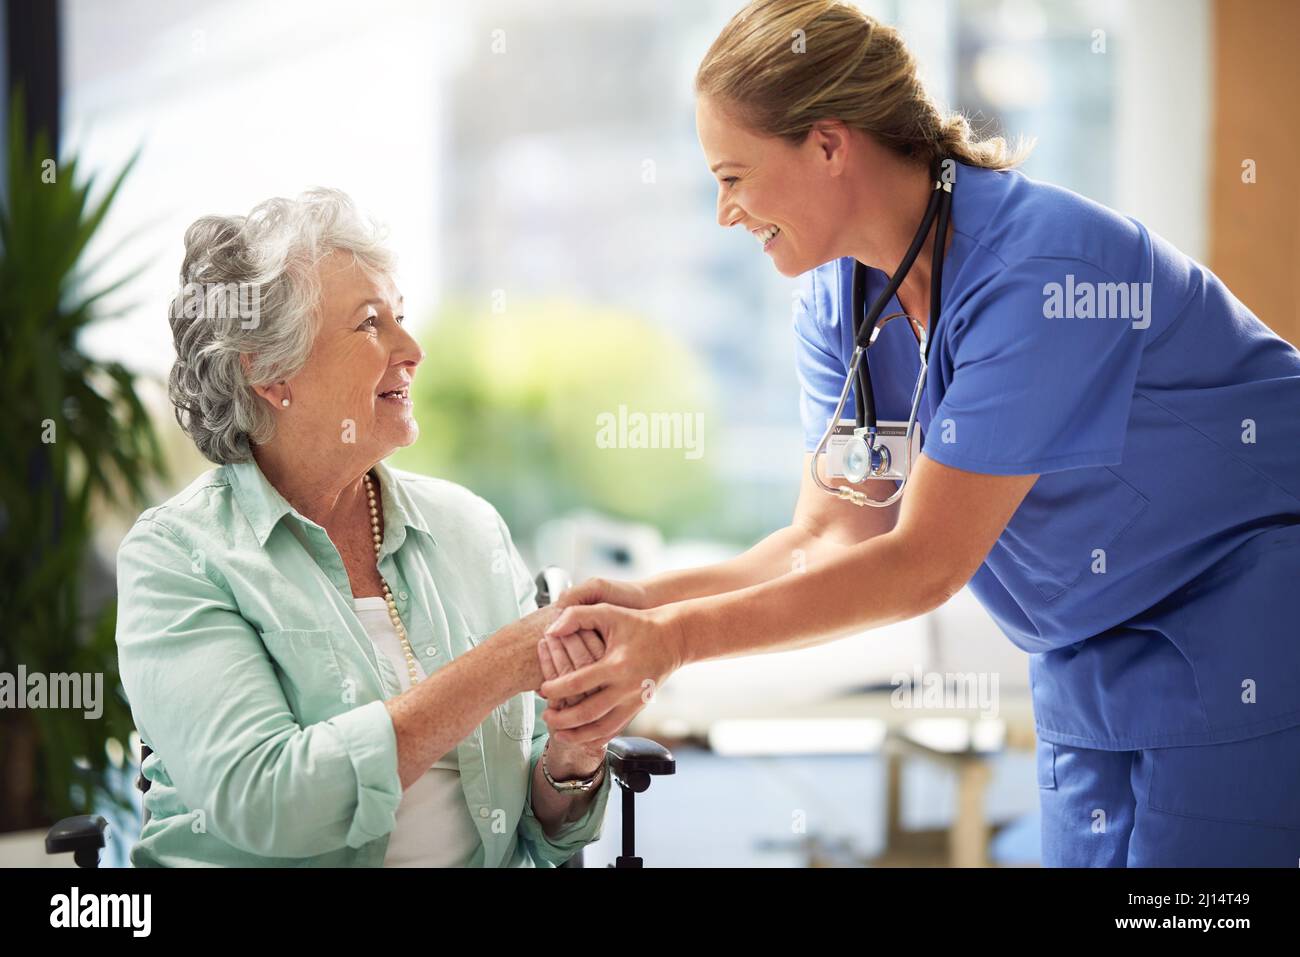 She has a great way with her patiends. Shot of a doctor shaking hands with a smiling senior woman sitting in a wheelchair. Stock Photo